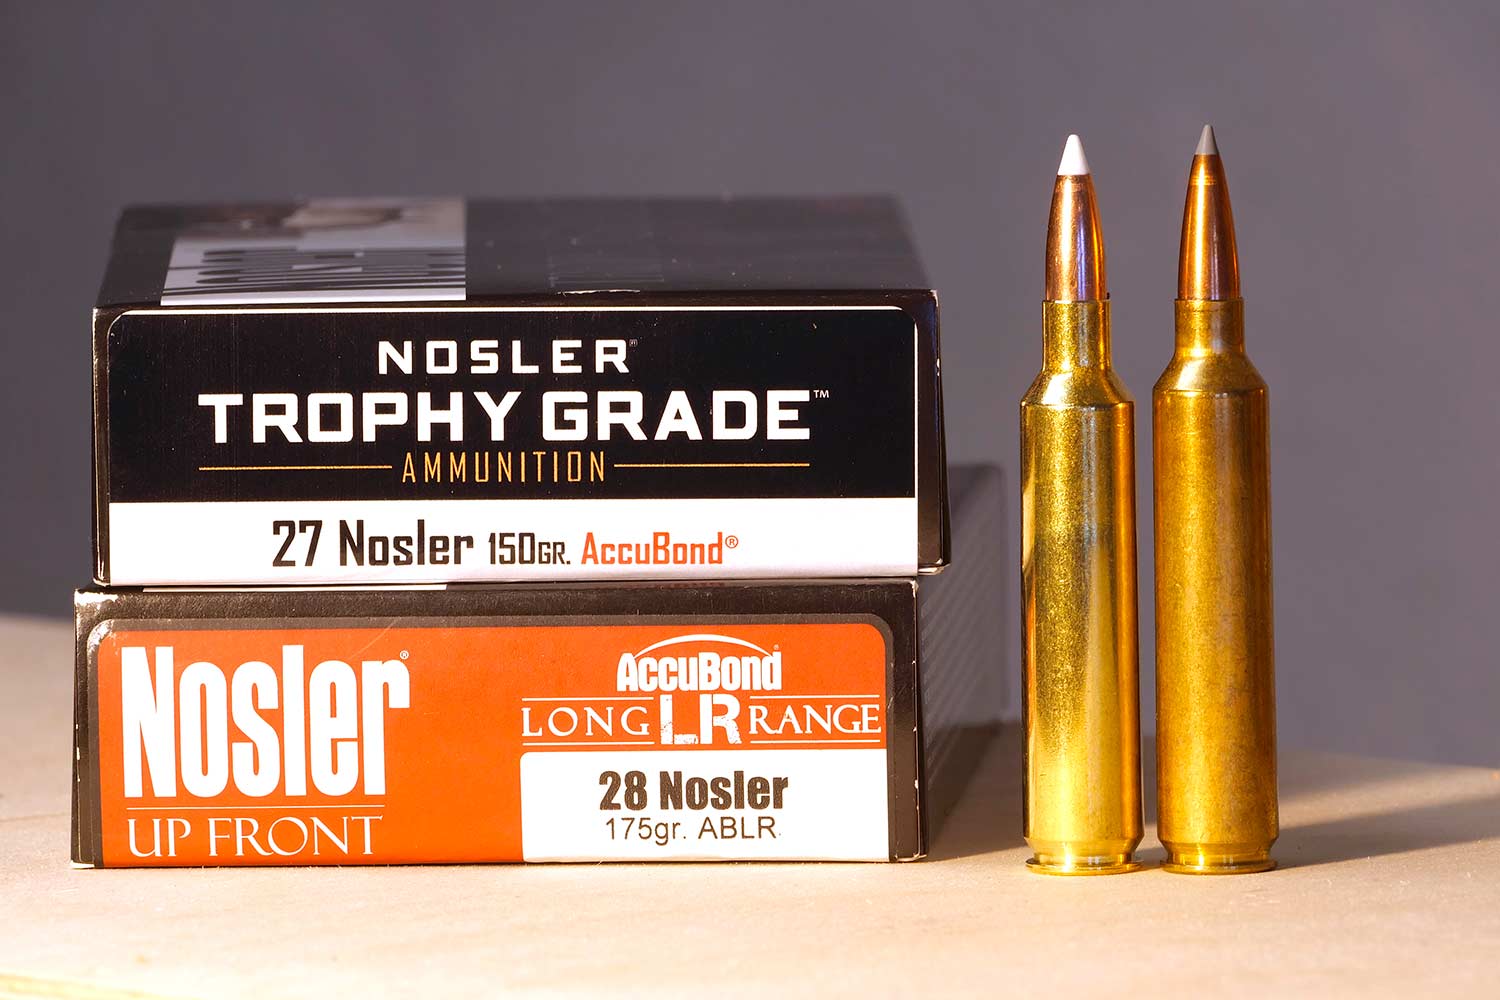 The .27 Nosler is kissing cousin to the .28 Nosler